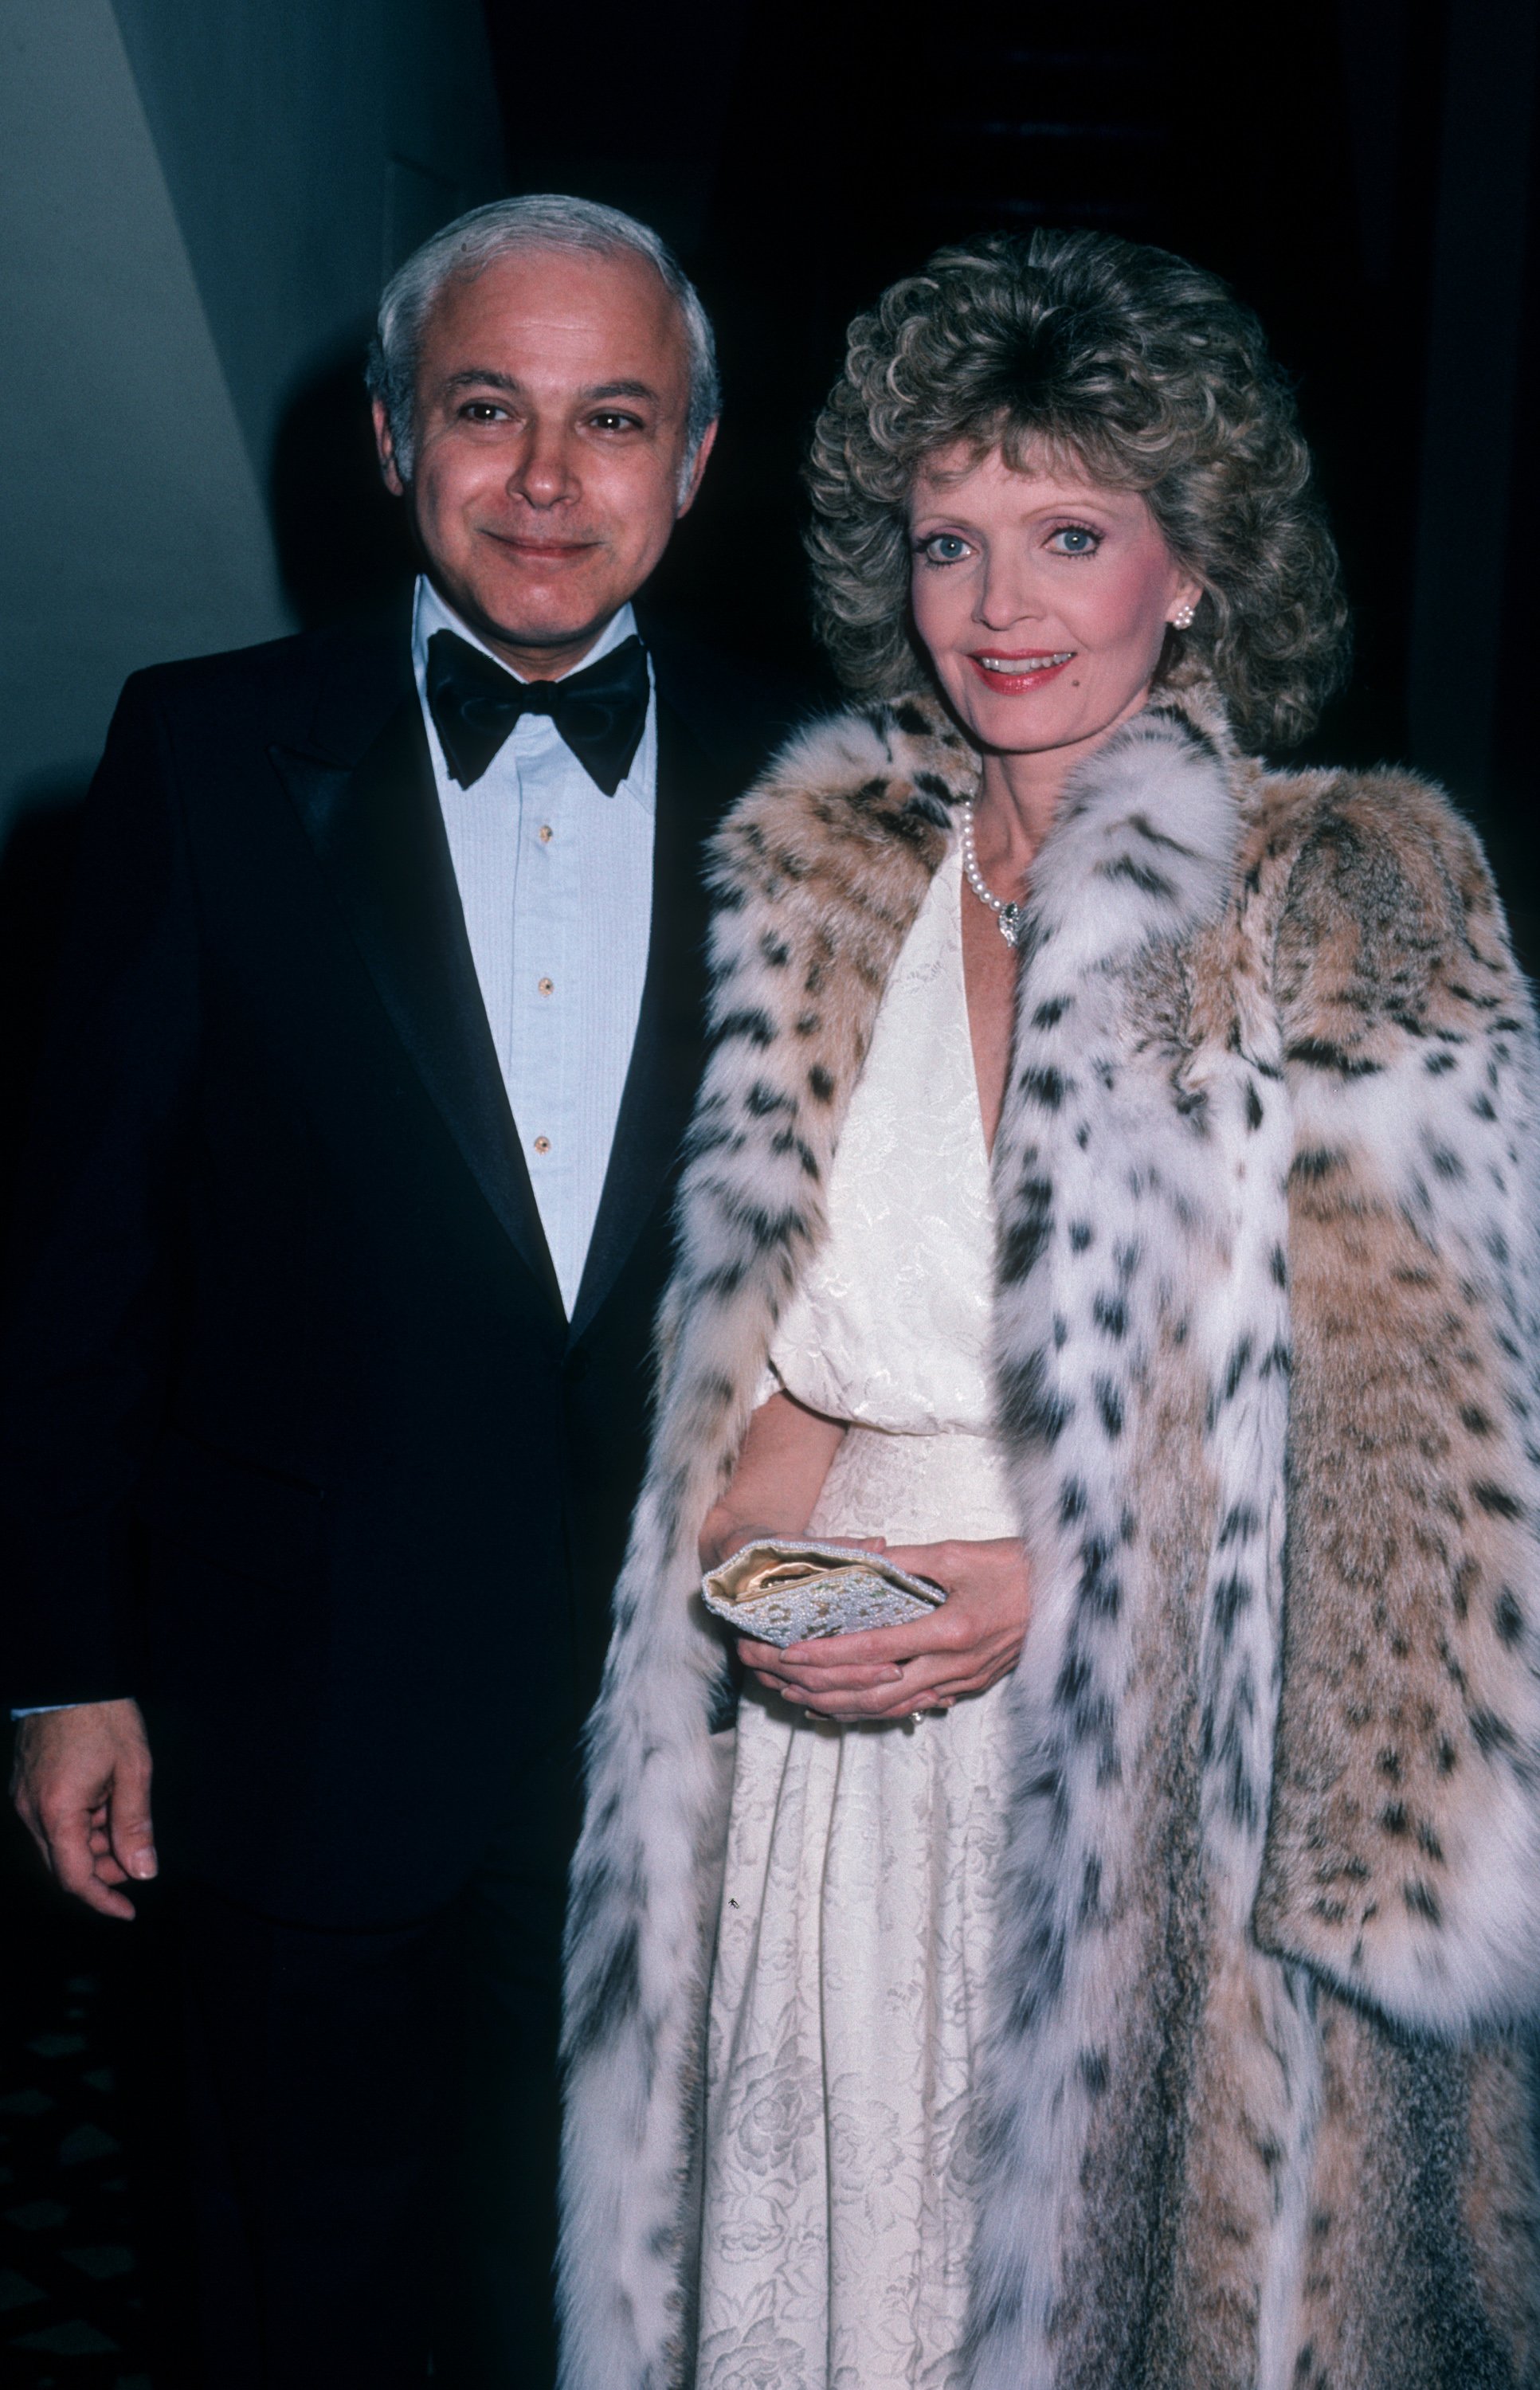 Ira Bernstein and Florence Henderson at the “Scopus Awards” on December 5, 1985, at the Century Plaza Hotel in Century City, California | Photo: Ron Galella, Ltd./Ron Galella Collection/Getty Images